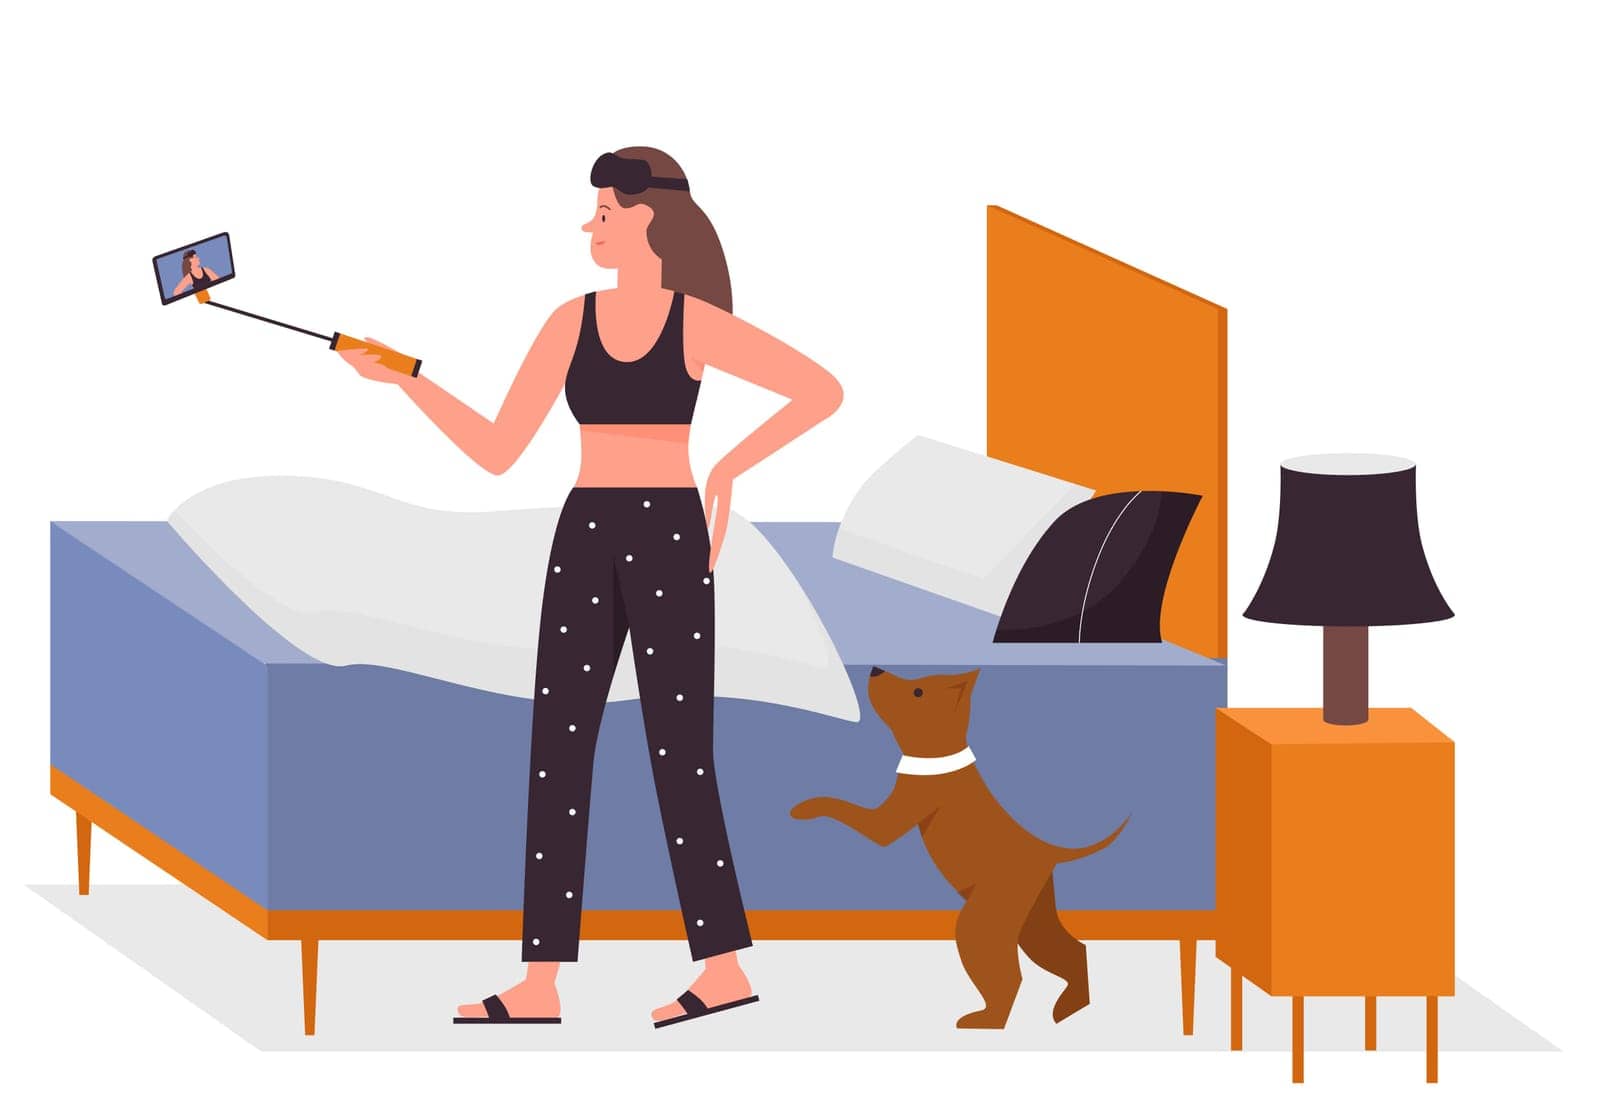 Female blogger daily lifestyle. Posting personal life, engaging content isolated illustration